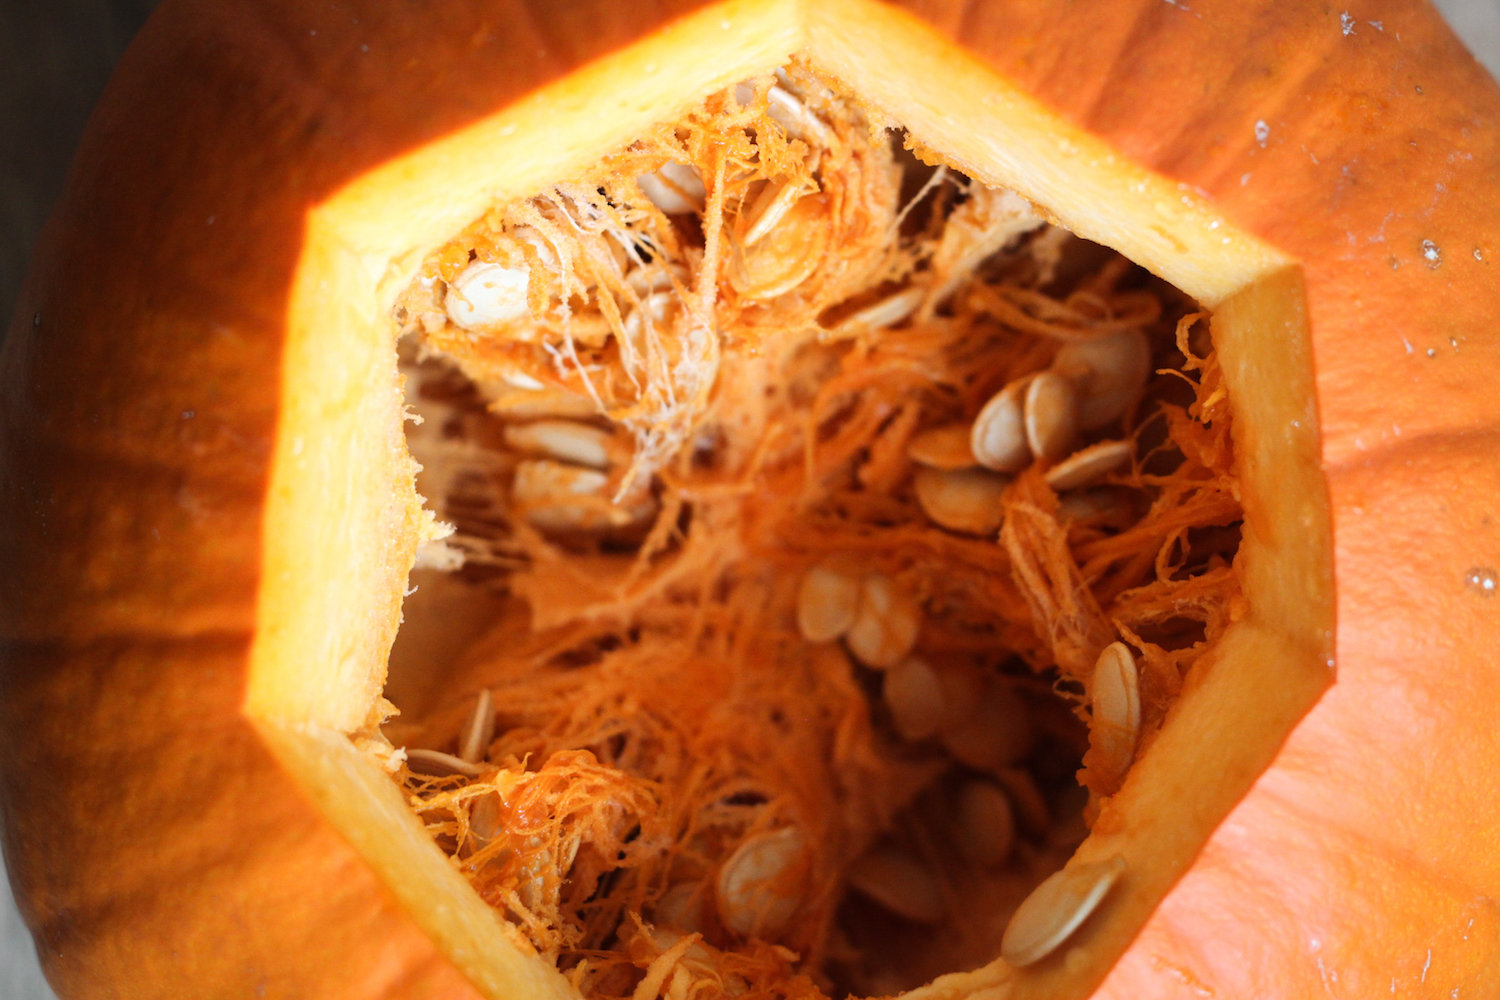 The gaping maw of a pumpkin (Eat Me. Drink Me.)